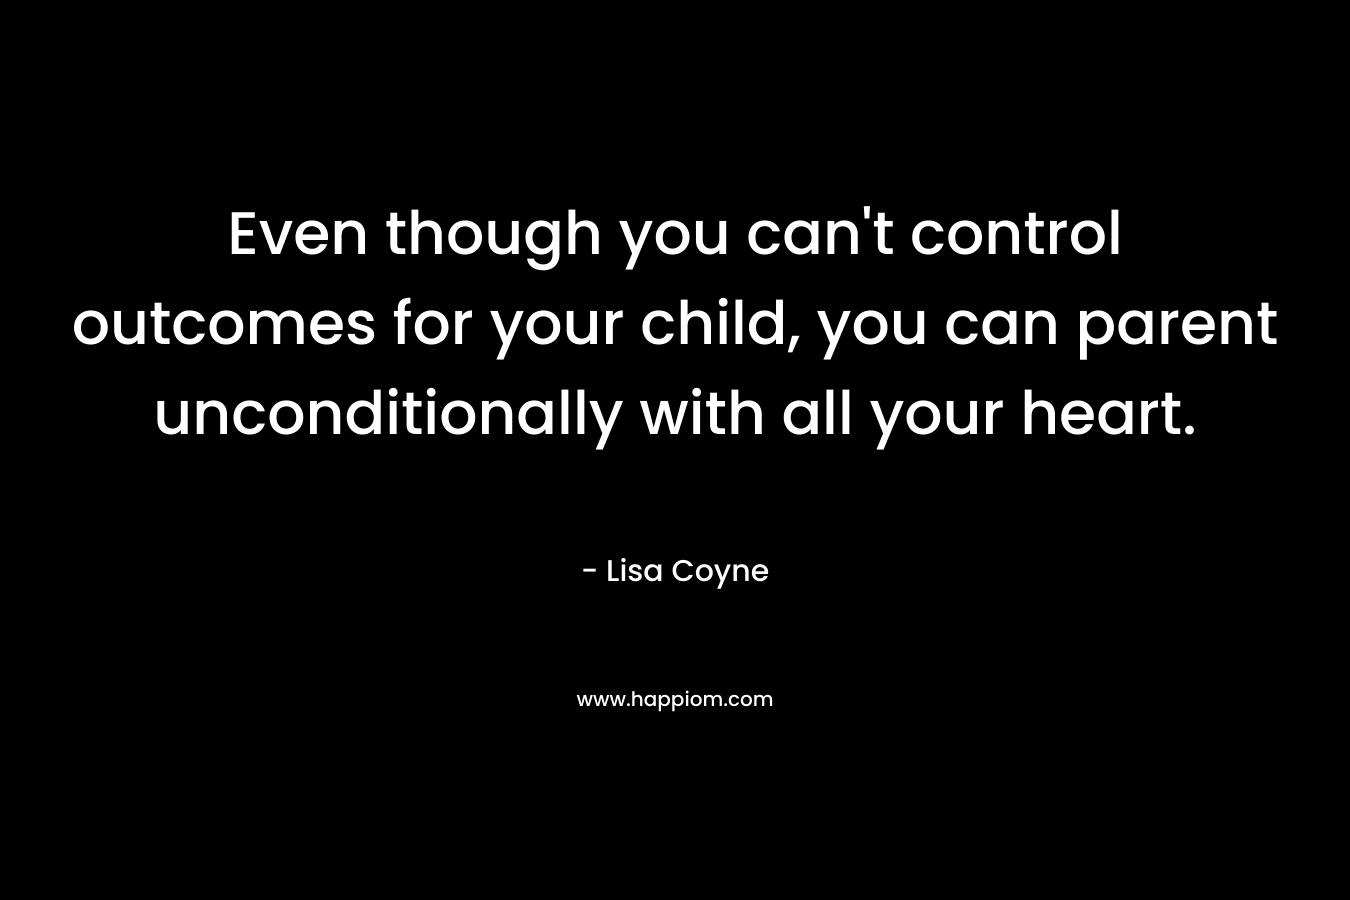 Even though you can't control outcomes for your child, you can parent unconditionally with all your heart.